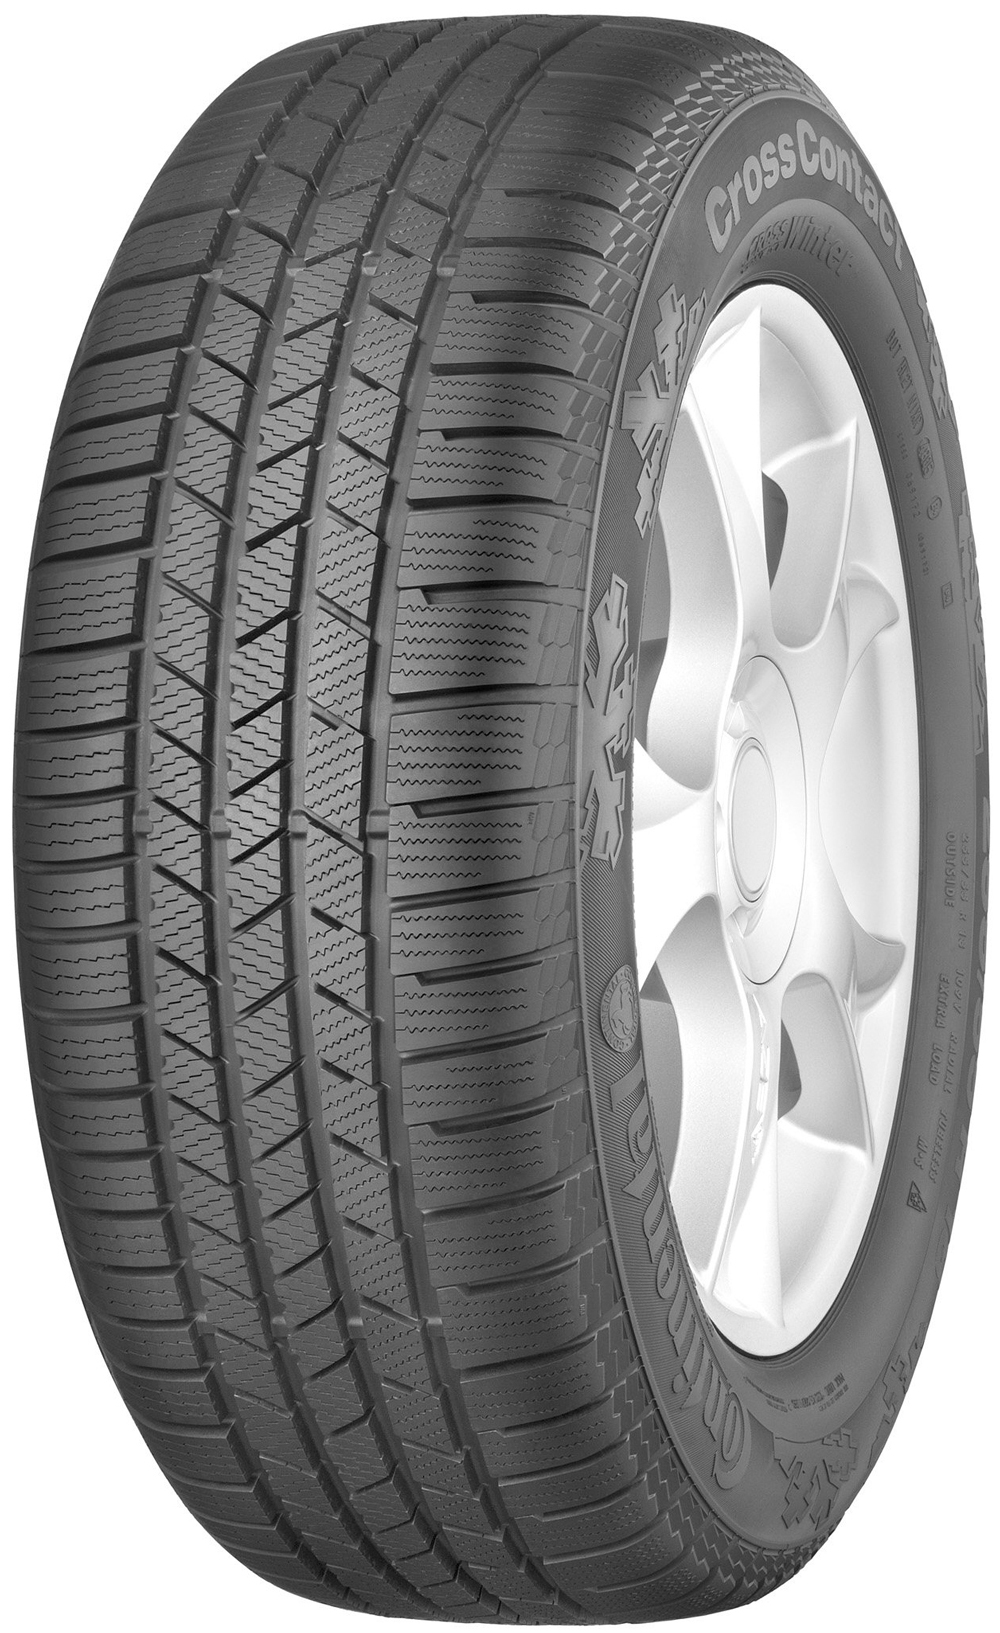 Anvelope auto CONTINENTAL Conti Cross Contact Winter XL MERCEDES FP 285/45 R19 111